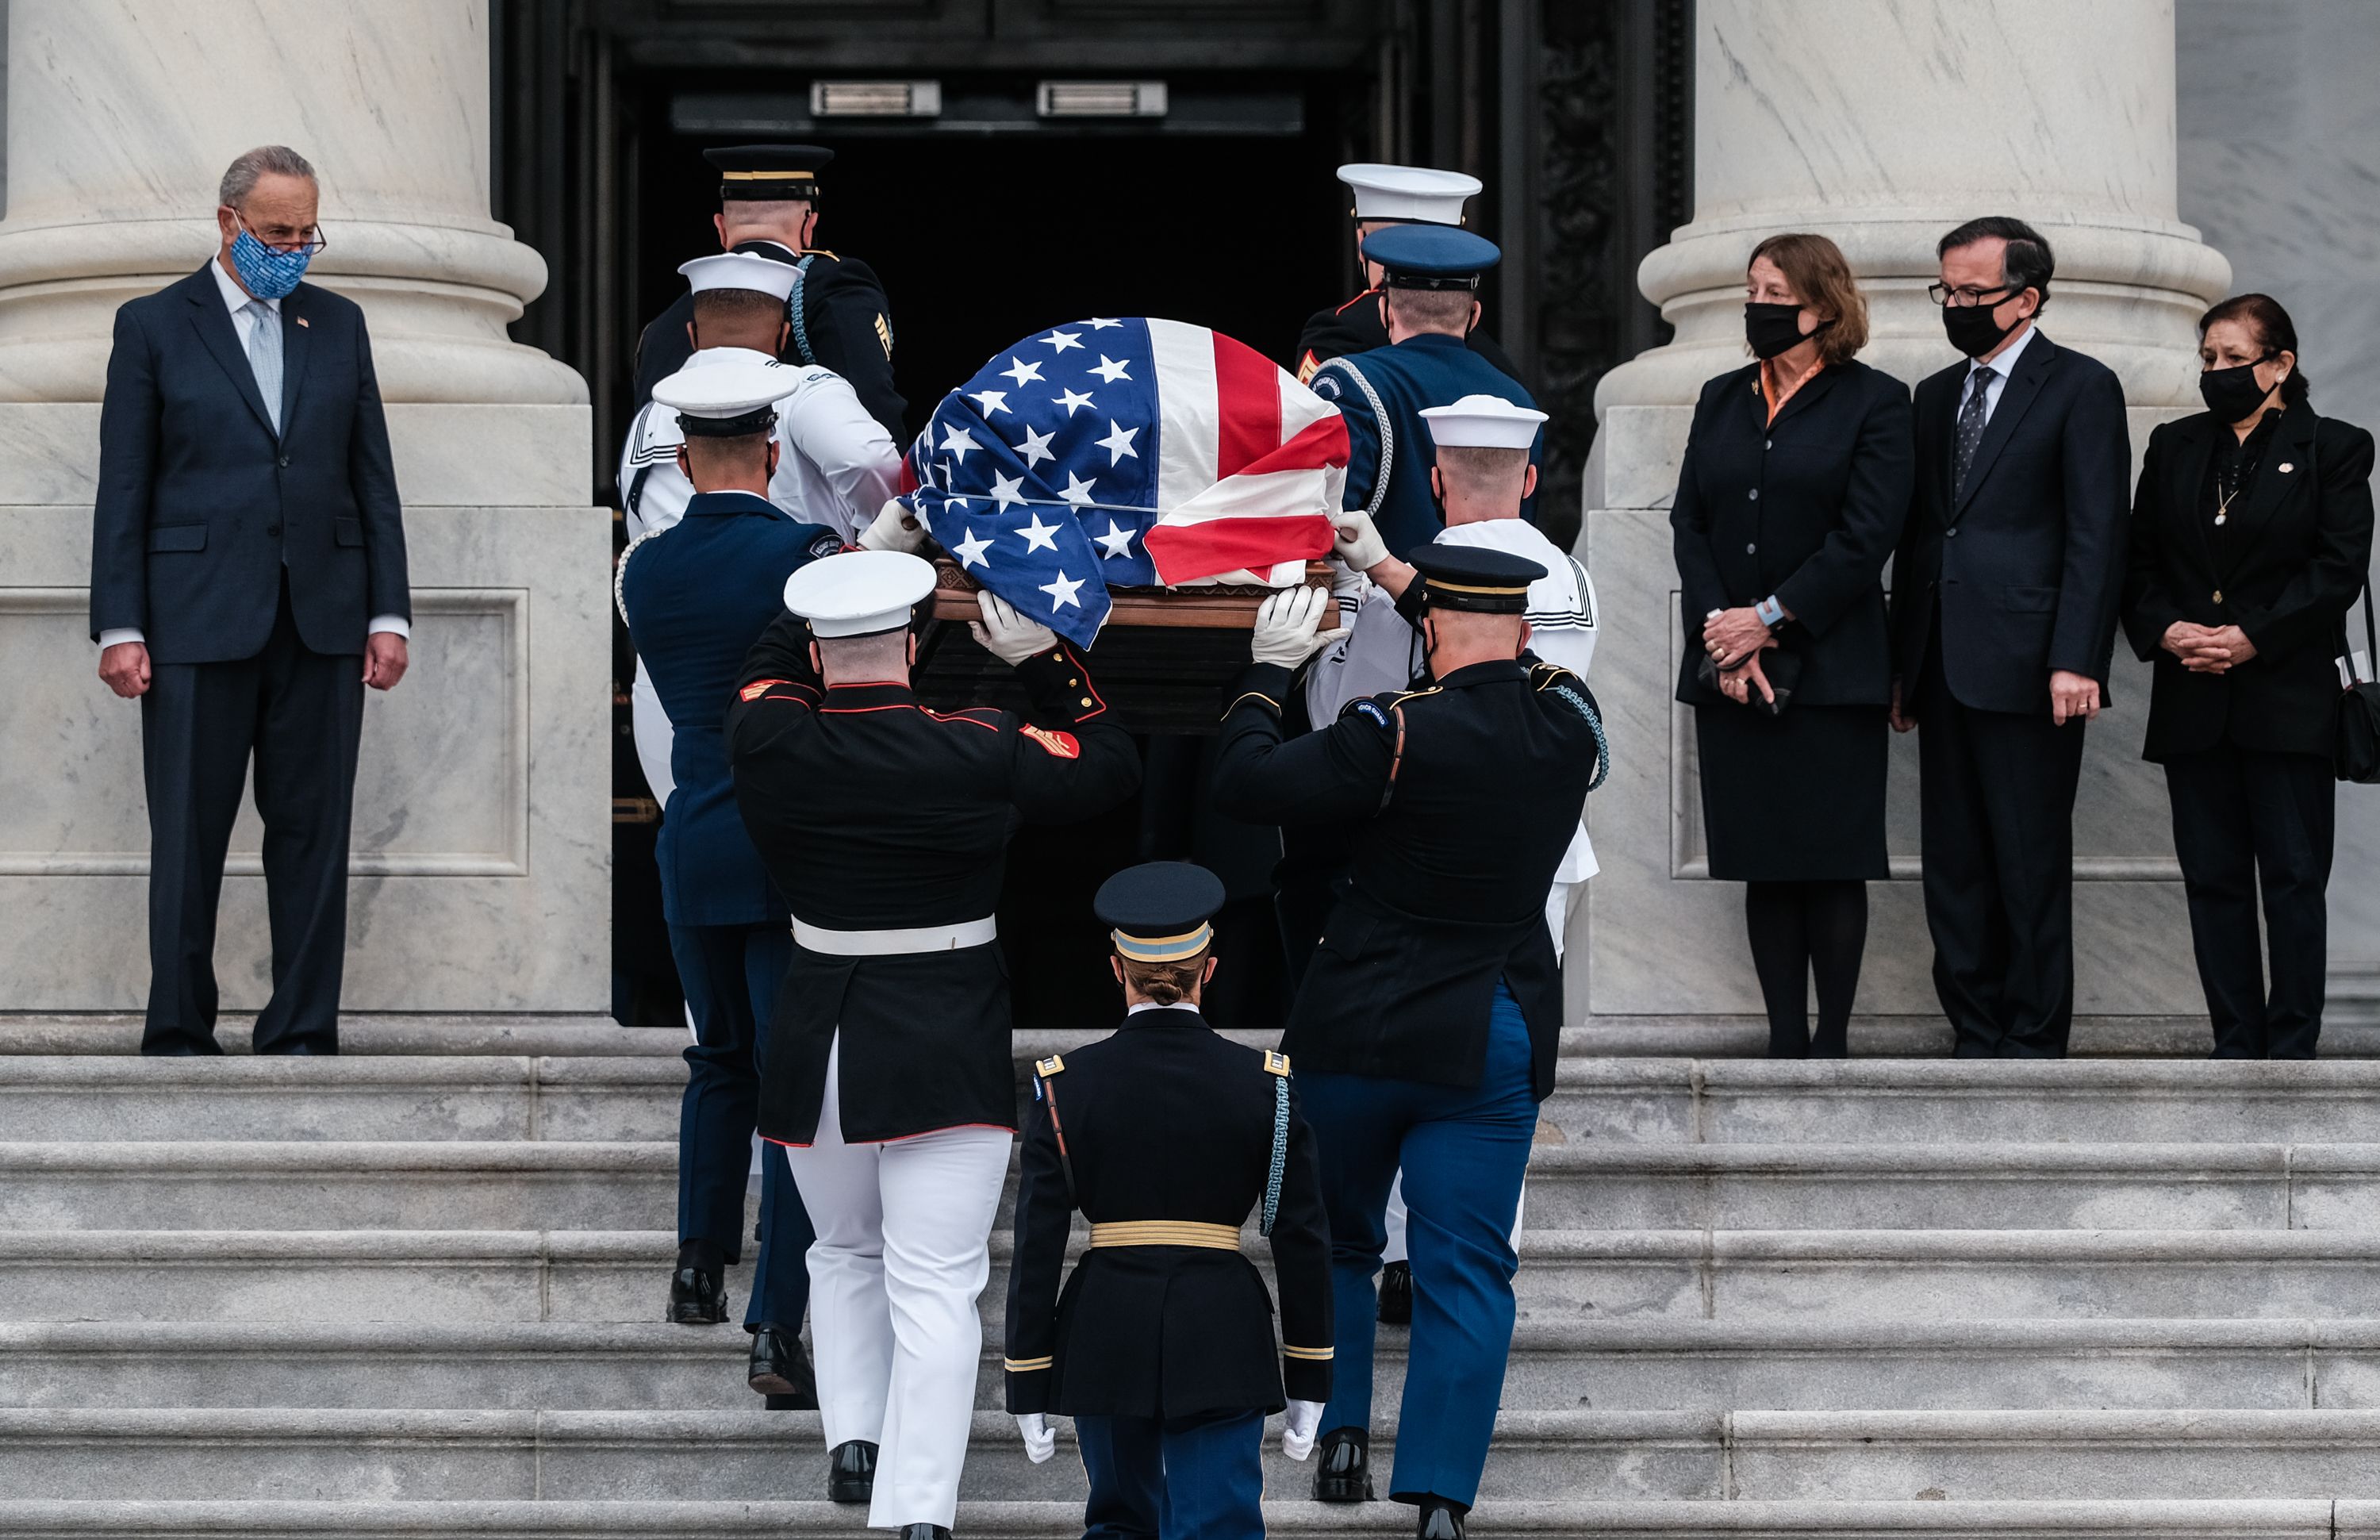 Ginsburg is escorted up the Capitol steps by a military honor guard. Photo: Michael A. McCoy/Getty Images